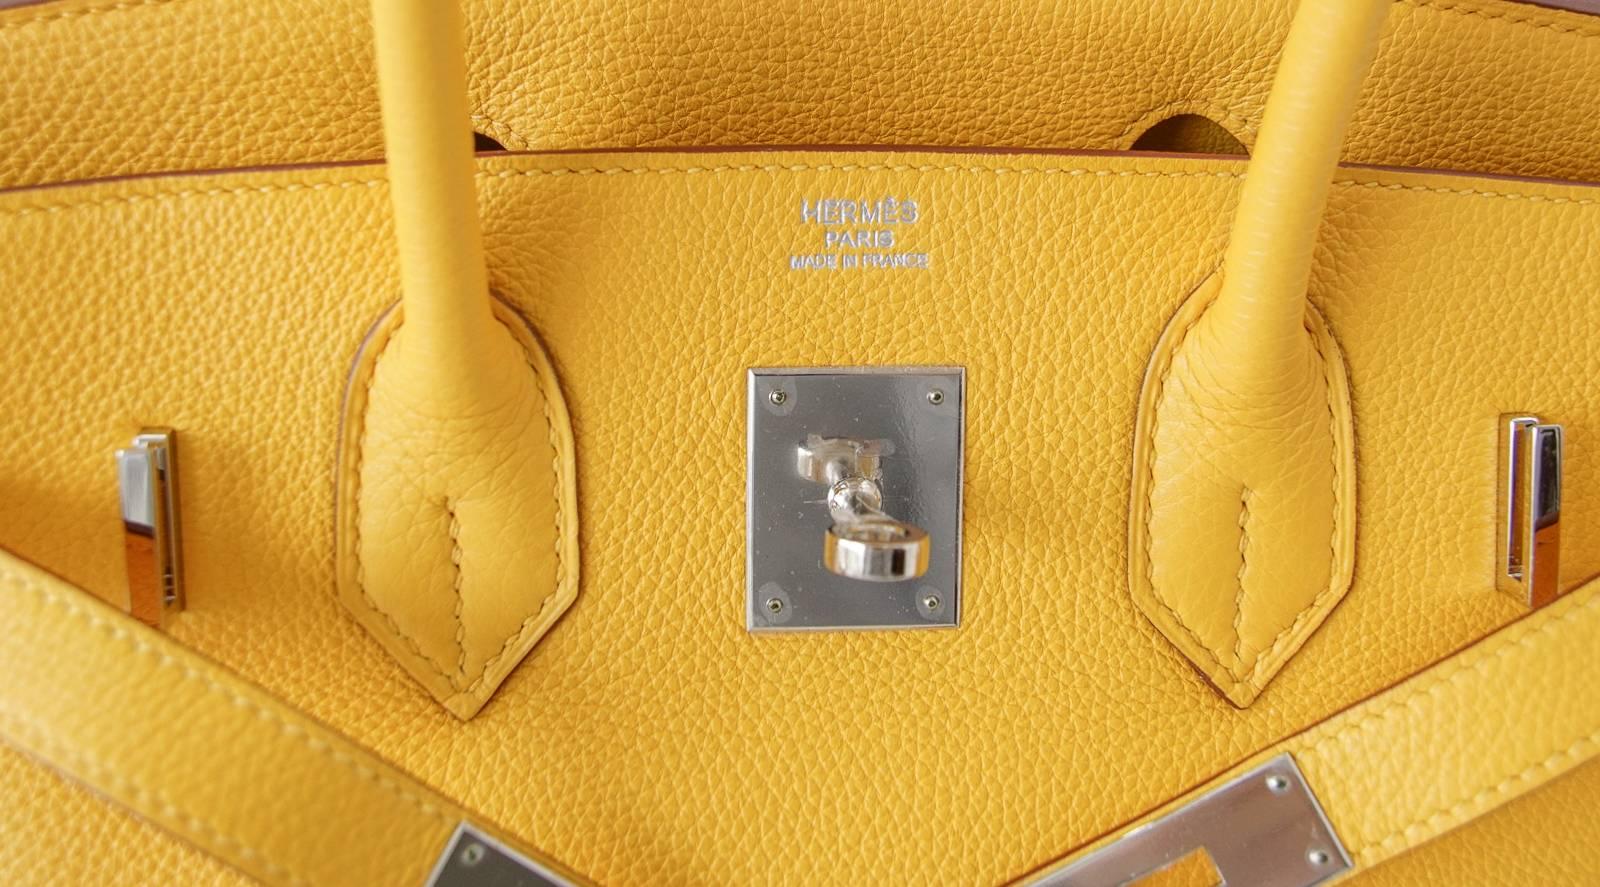 Guaranteed authentic Hermes Birkin 30 bag in rare Soleil - sunny yellow perfection!.
Fresh with Palladium hardware and togo leather.
Plastic on hardware.
Comes with the lock and keys in the clochette, signature Hermes box, sleeper and raincoat.
NEW